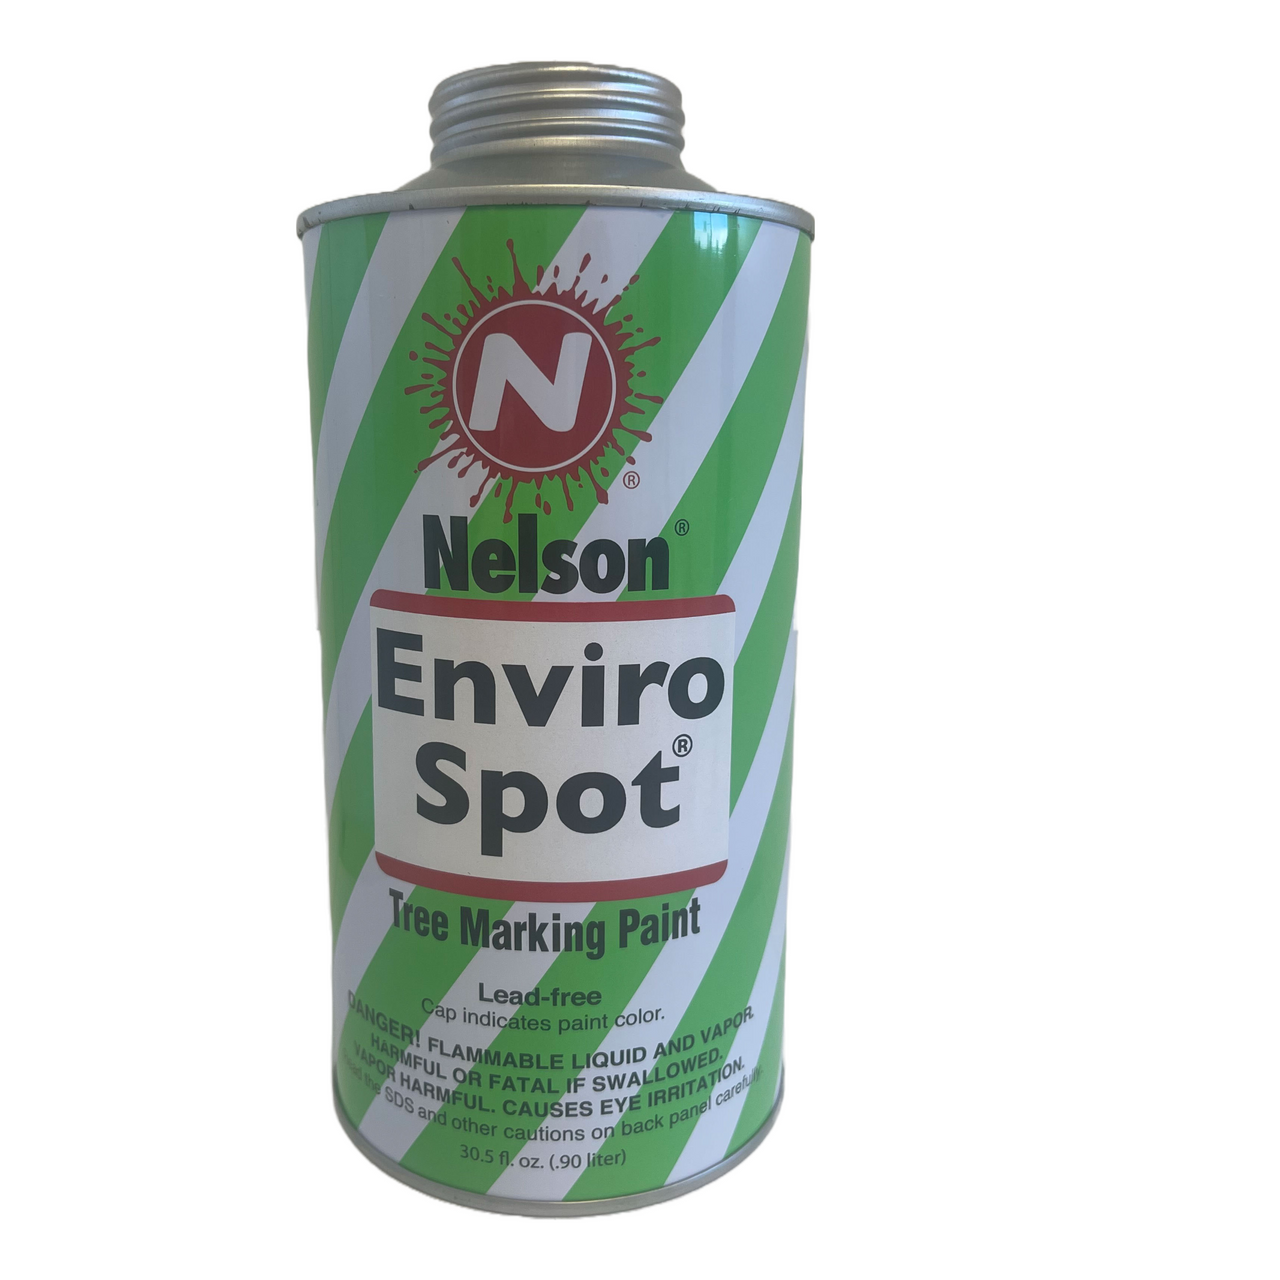 Nelson Aero Spot® Marking Paint 12 Oz Can (Purchase 24+ Save $0.75 / Can)